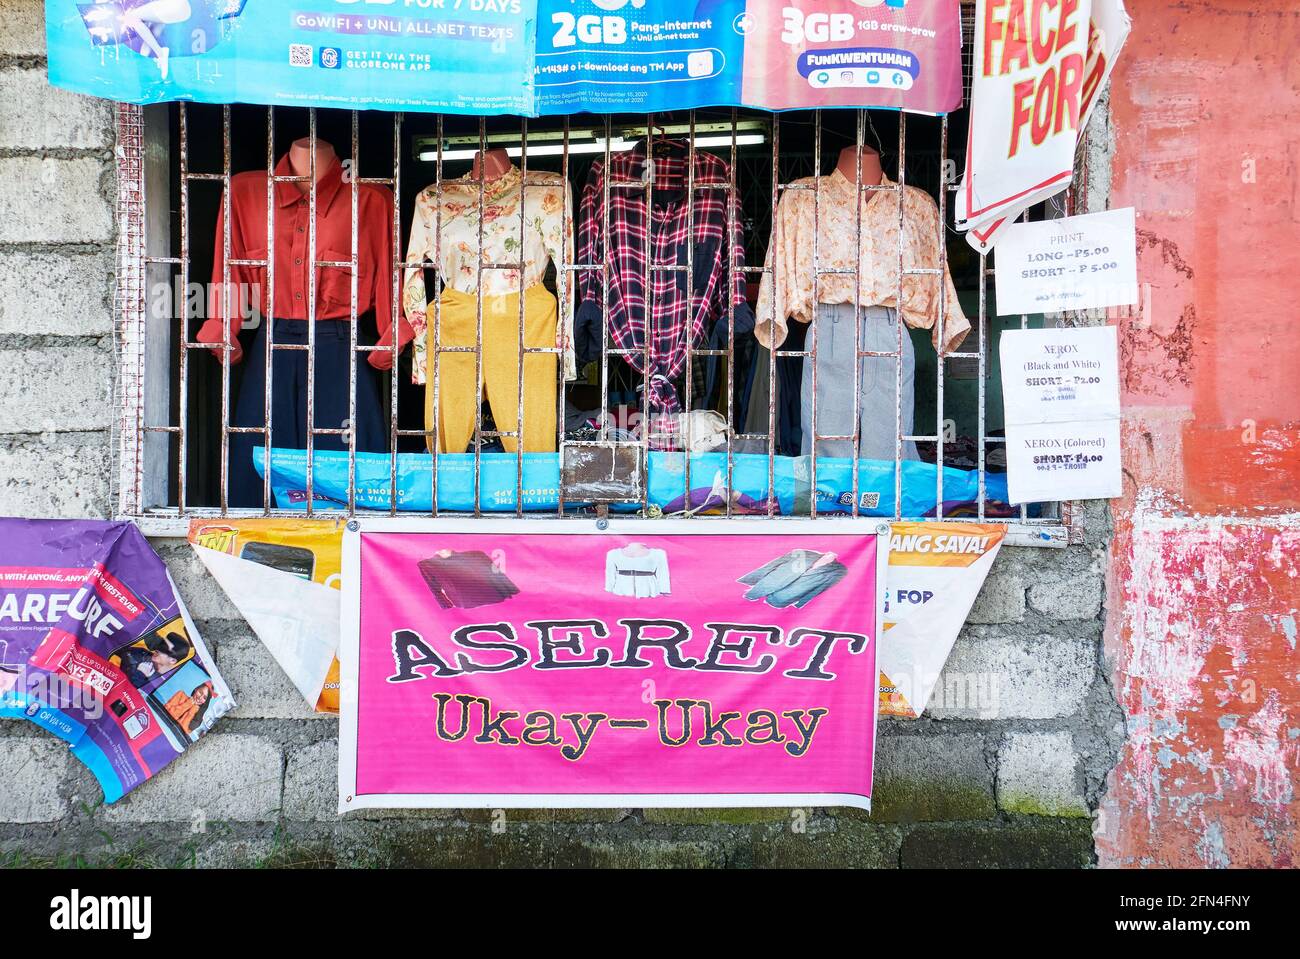 An Ukay-Ukay window store selling used clothes as an extra income to overcome the poverty during the covid pandemic times in the Philippines Stock Photo